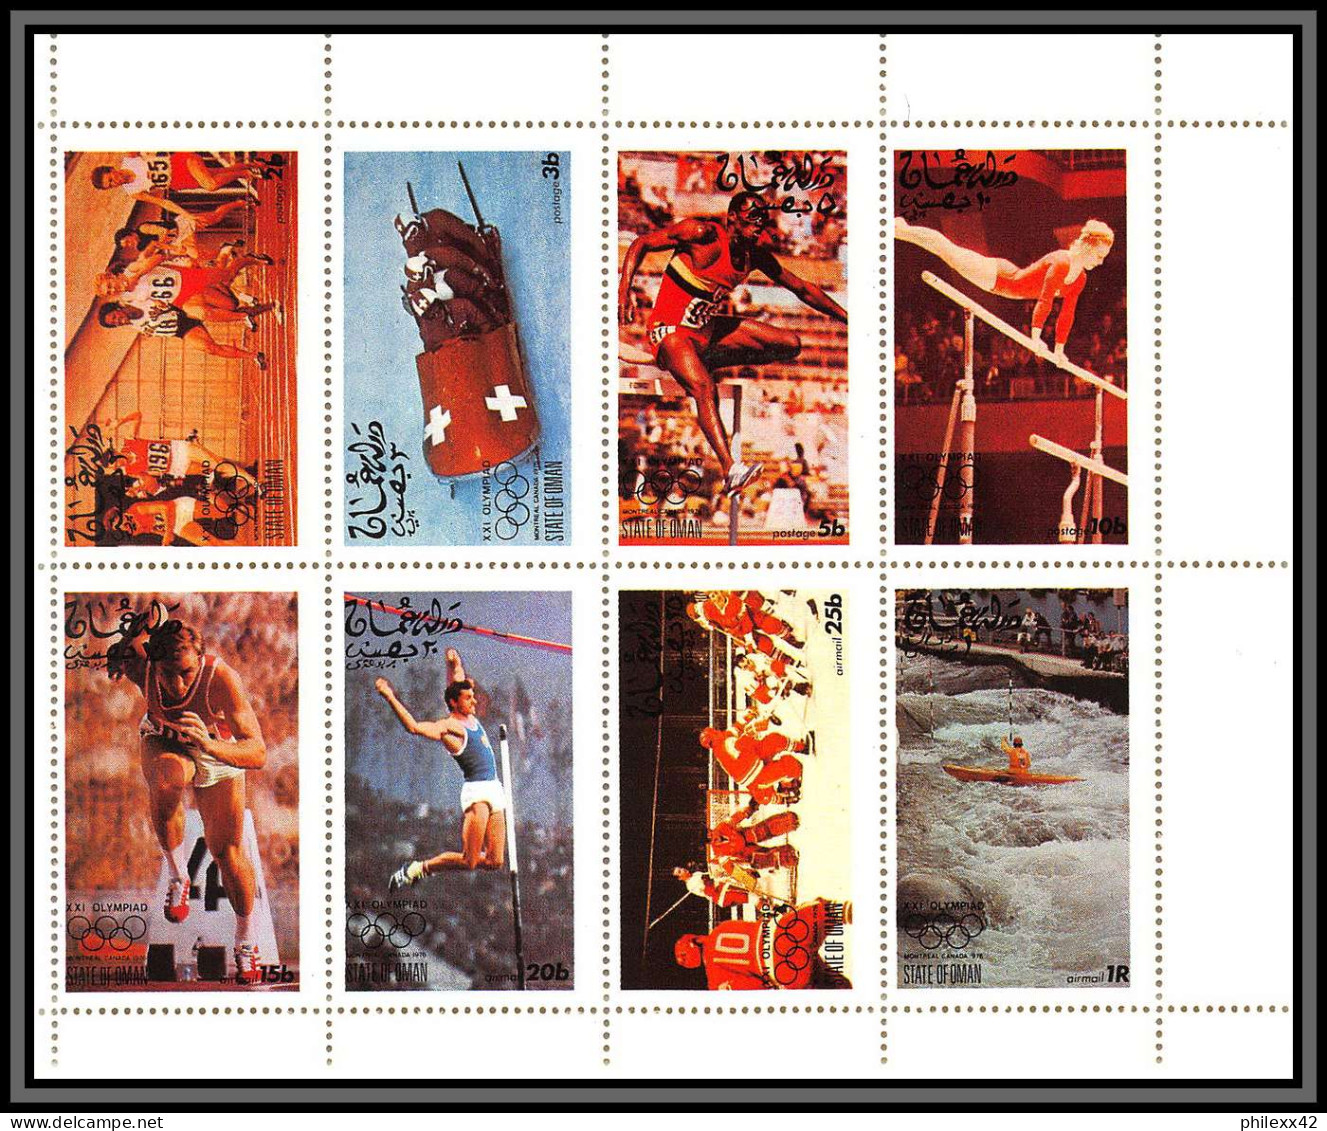 81665 Oman Bloc + Série Montreal Innsbruck 1976 Jeux Olympiques (olympic Games) ** MNH Hockey  - Hiver 1976: Innsbruck